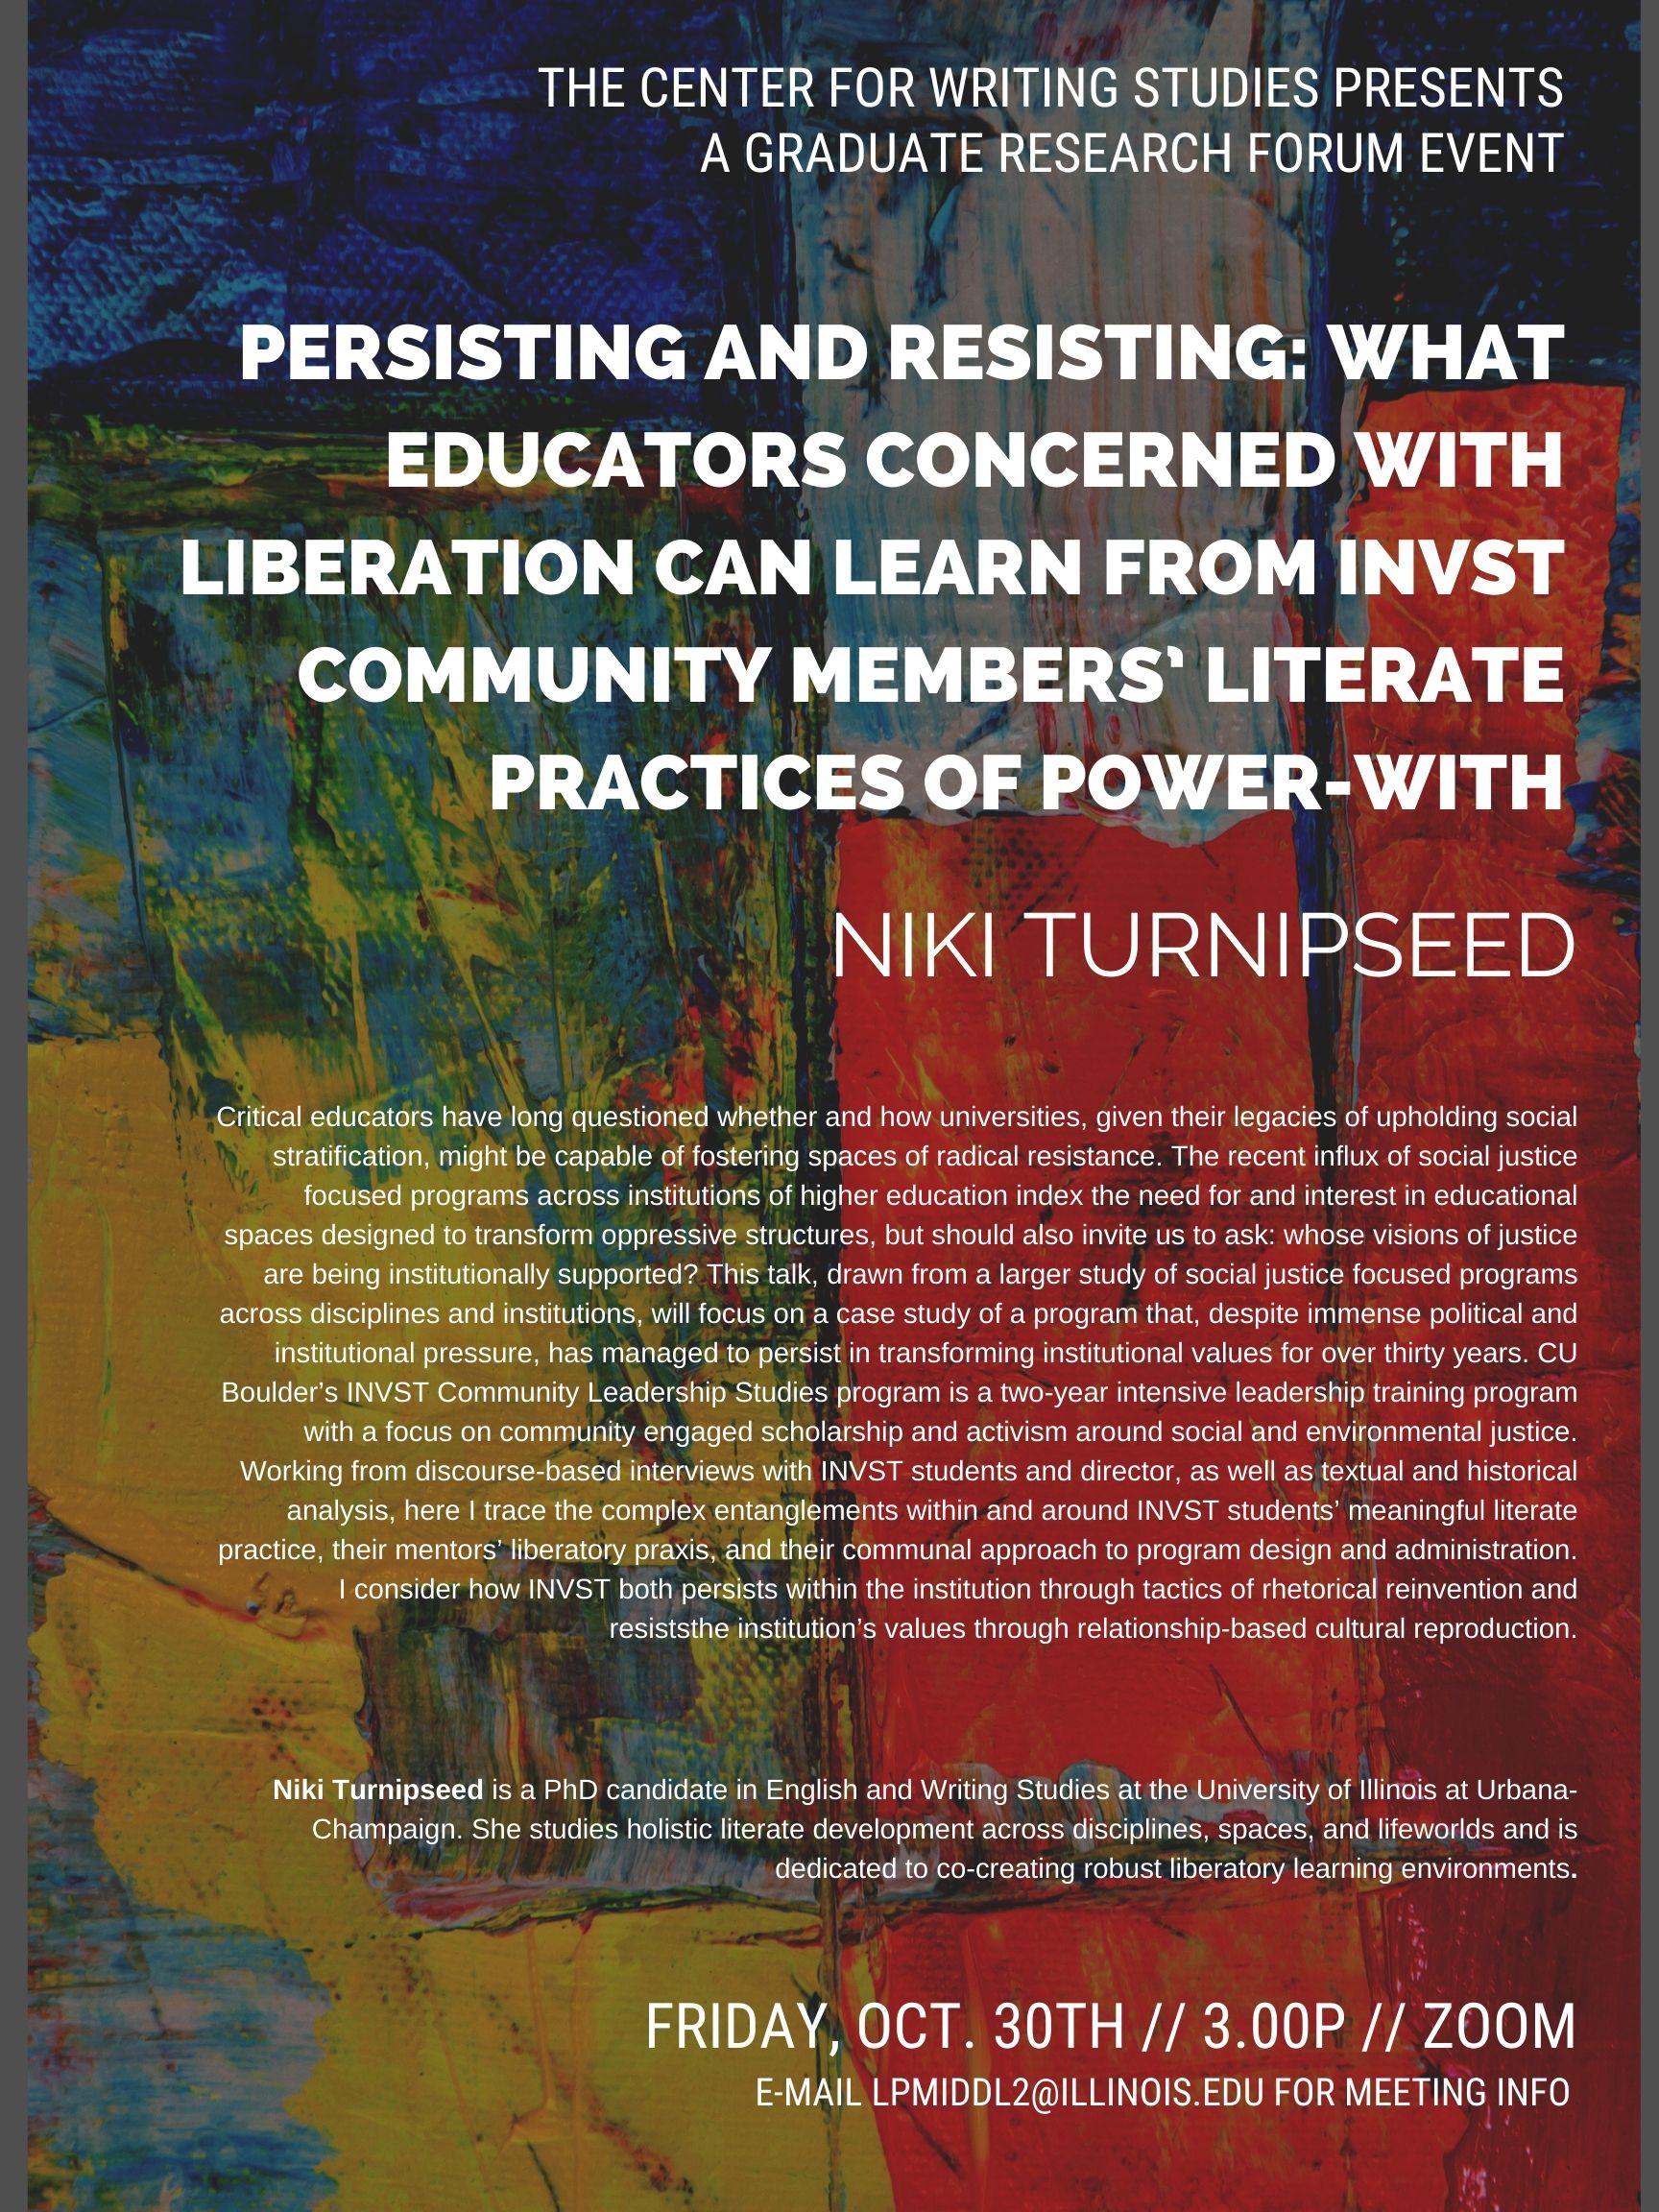 Event flyer with abstract red, yellow, green, and blue painted canvas background. White text appears at top and reads “The Center for Writing Studies Presents A Graduate Research Forum Event.” In bolder, white text below, the title of the talk is listed: “Persisting and Resisting: What Educators Concerned with Liberation Can Learn from INVST Community Members’ Literate Practices of Power-With” along with Niki Turnipseed’s (the presenter) name.  Below, two blocks of white text appear: an abstract and bio